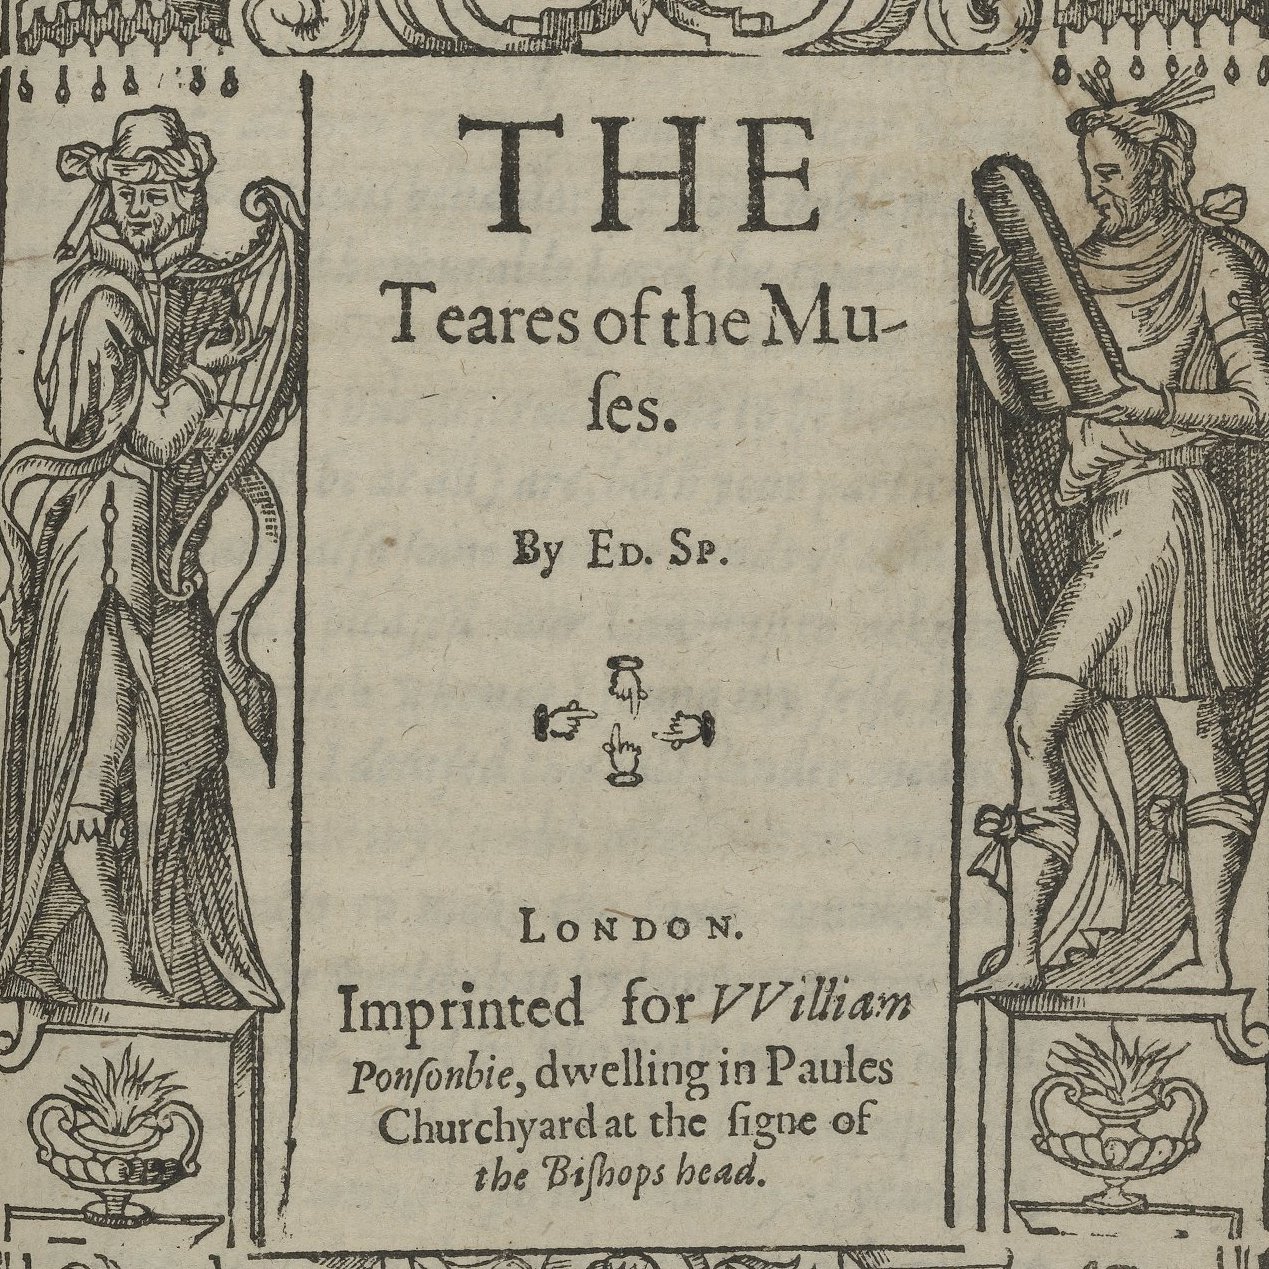 “Looke backe, who list”: Reassessing the 1611 Folio Text of Complaints